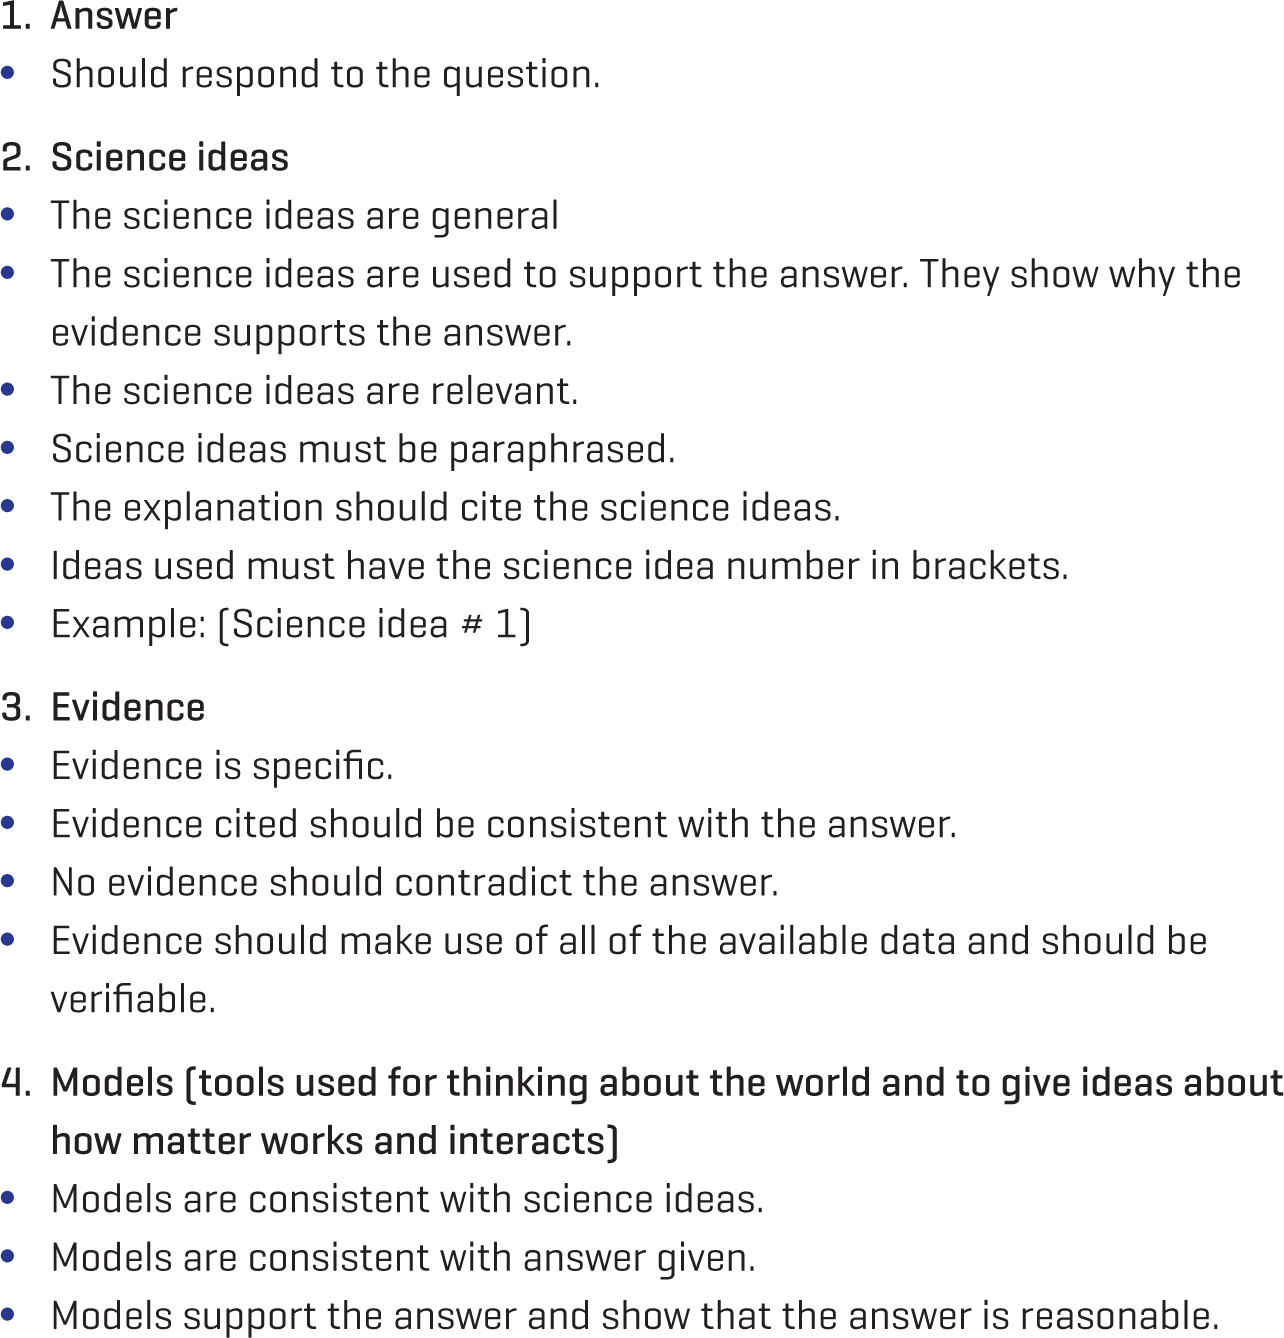 Student checklist for writing and critiquing explanations